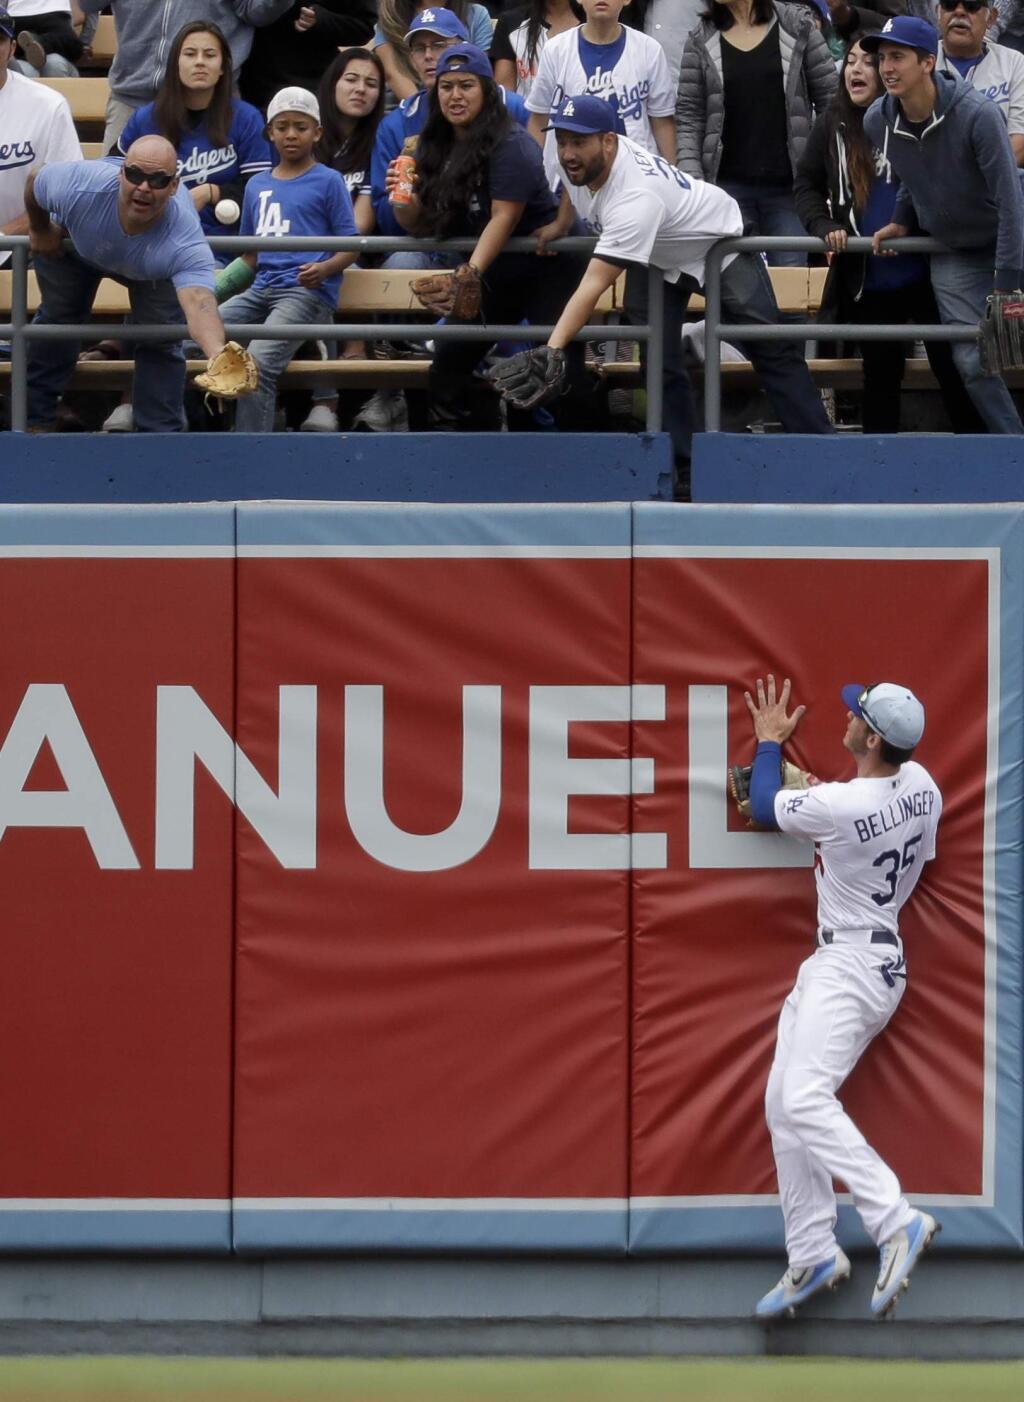 Fans try to catch a two-run home run ball hit by San Francisco Giants' Brandon Belt as Los Angeles Dodgers first baseman Cody Bellinger looks on during the third inning of a baseball game in Los Angeles, Sunday, June 17, 2018. (AP Photo/Chris Carlson)